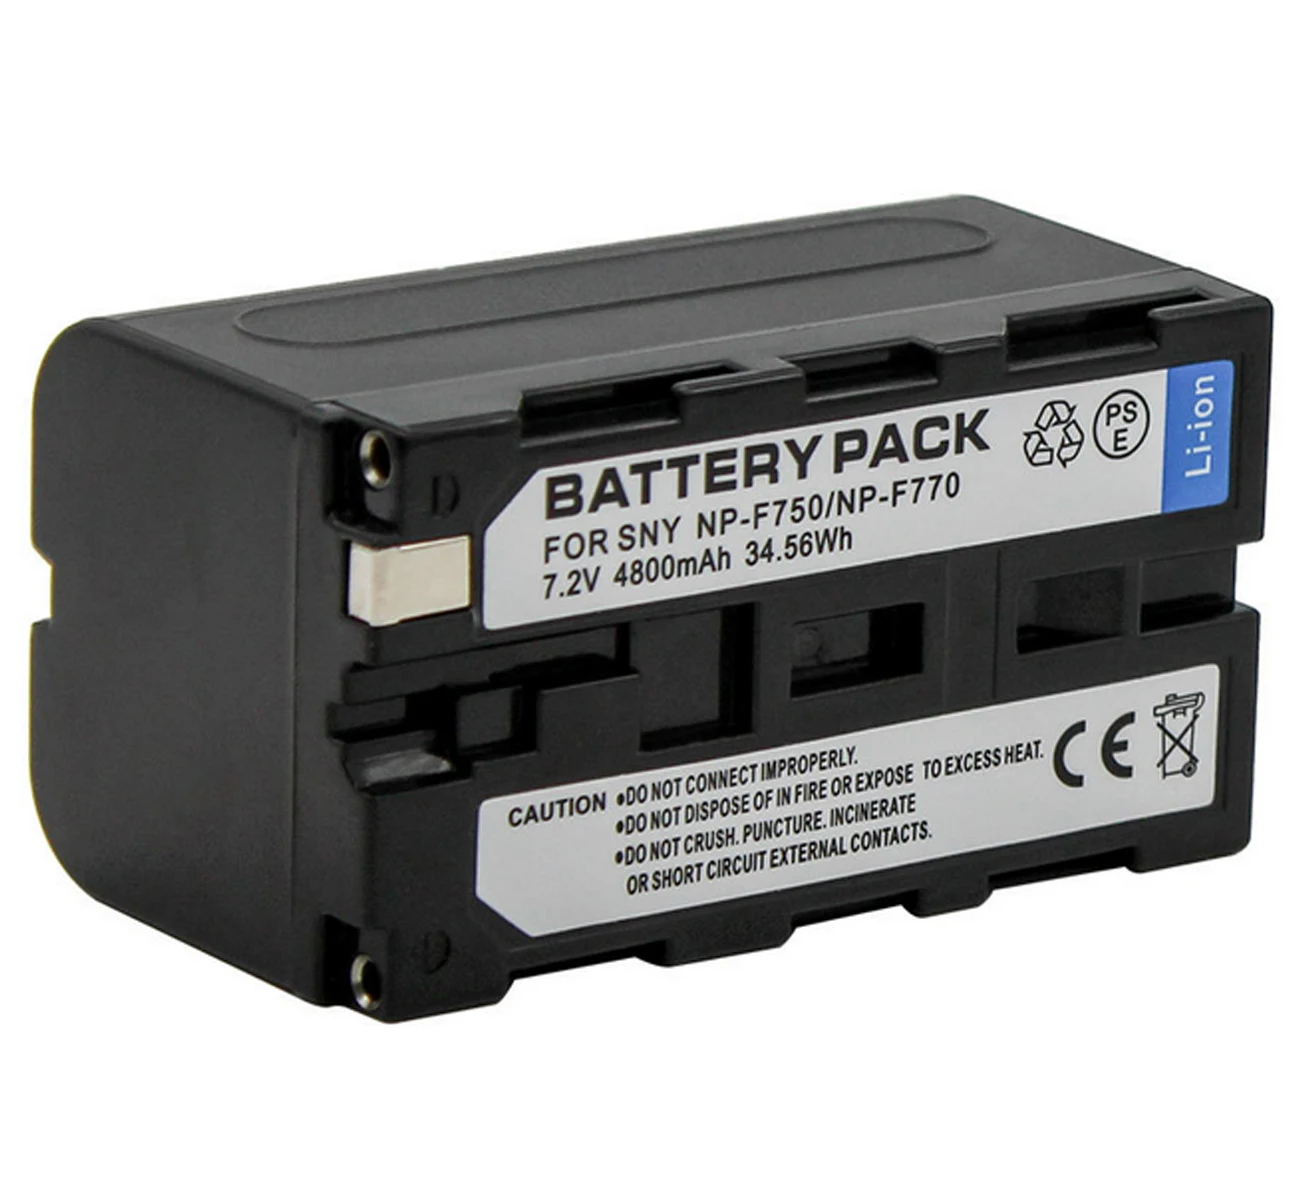 NP-F770 Battery and Sony CCD-TRV215 CCD-TR917 CCD-TR315 HDR-FX1000 HDR-FX7 HVR-V1U HVR-Z7U HVR-Z5U NP-F760 and Fast Charger Compatible with Sony NP-F730 Asperx NP-F750 Battery NP-F750 2 Pack 